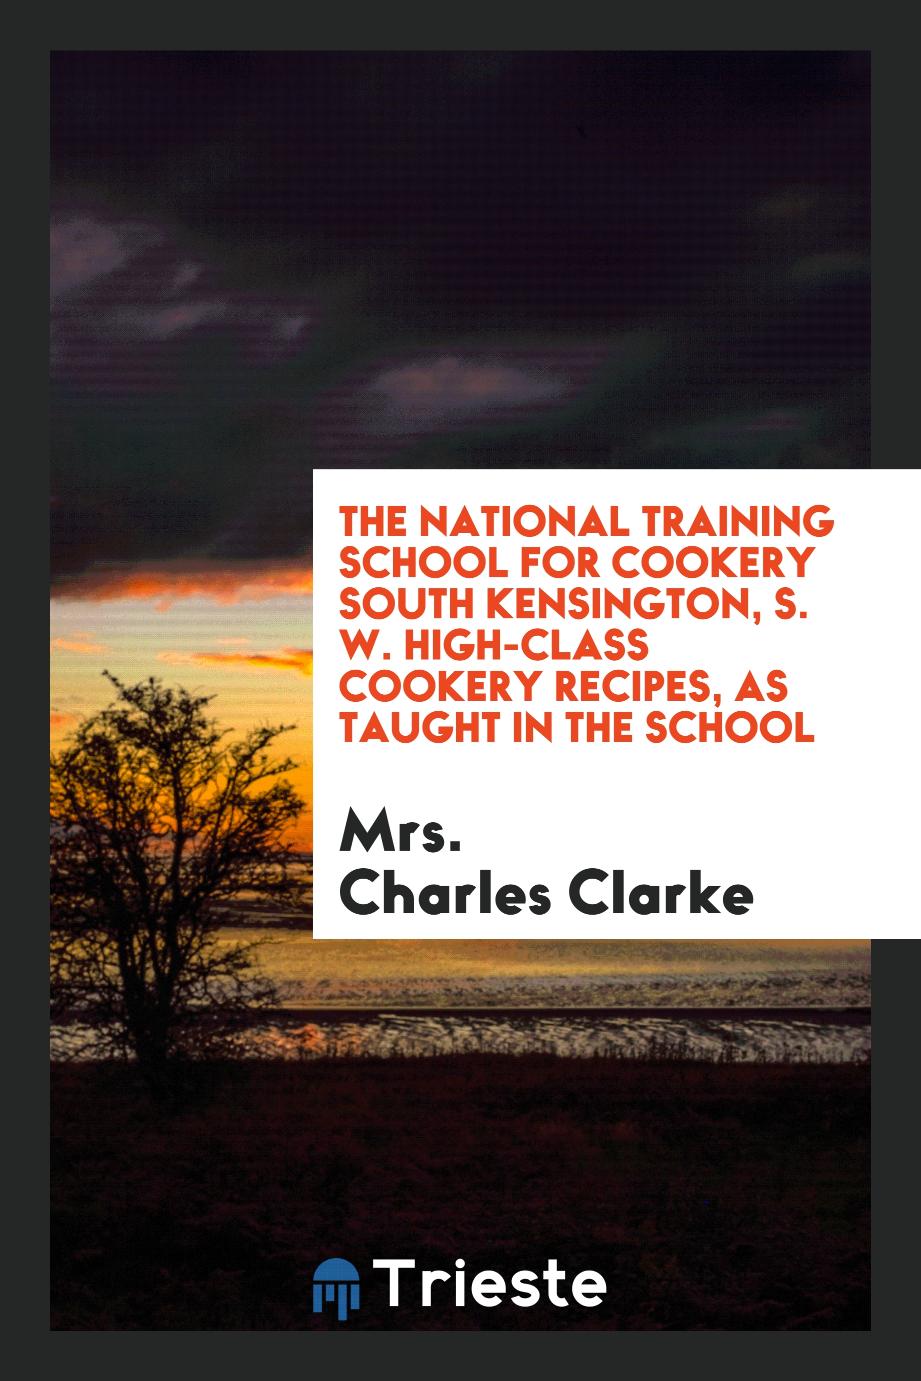 The National Training School for Cookery South Kensington, S. W. High-Class Cookery Recipes, as Taught in the School